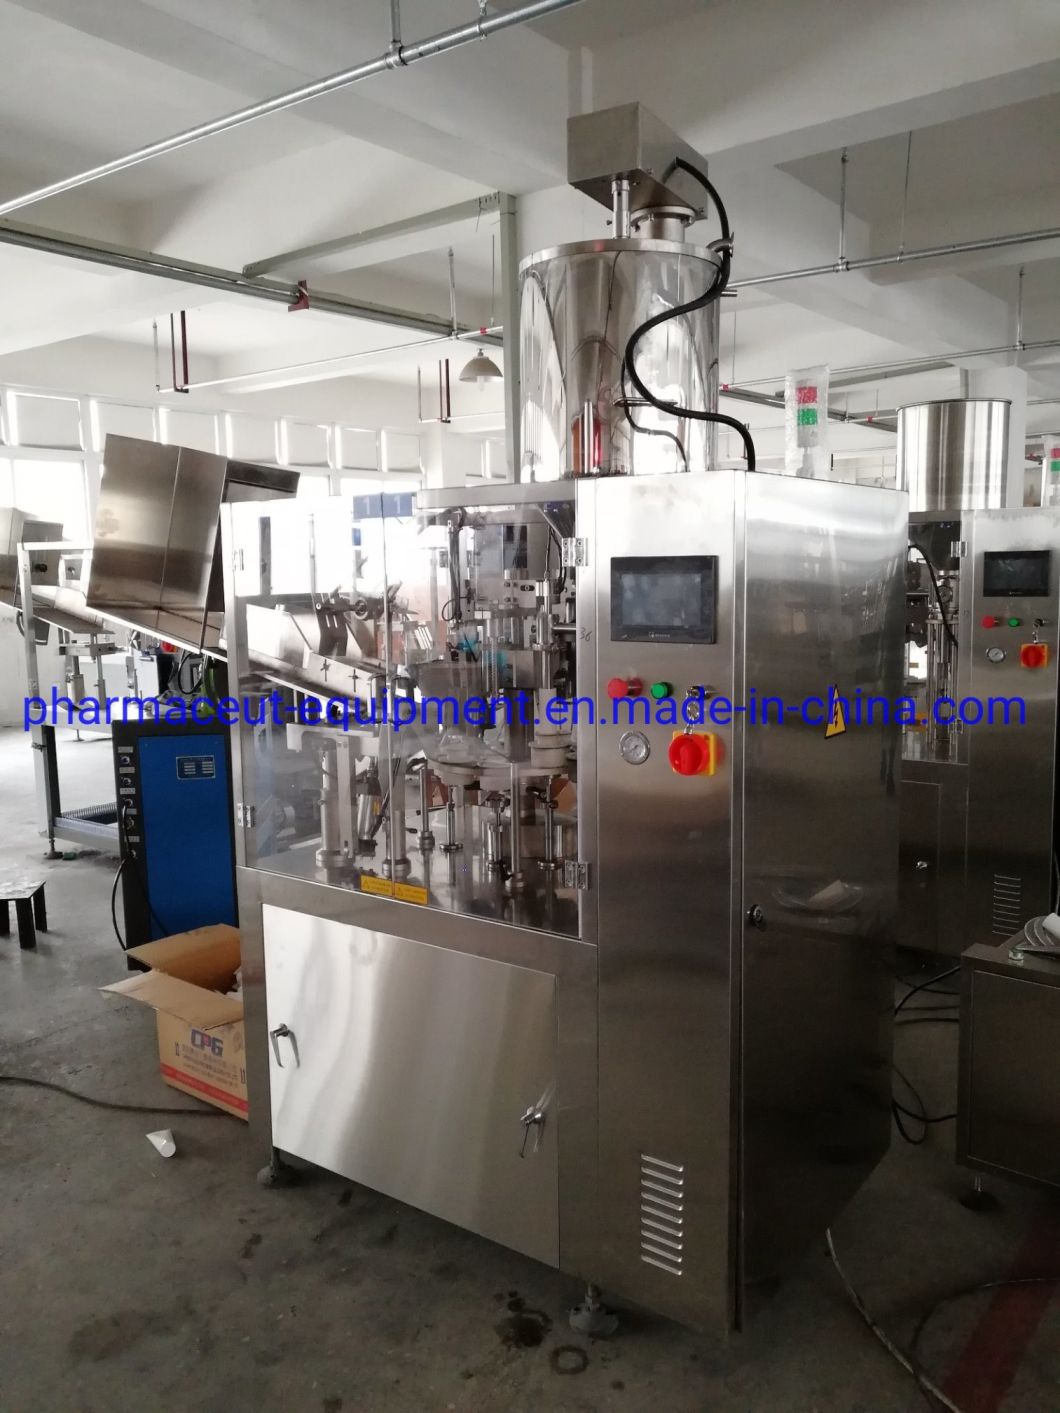 Hot Sale Soft Tube/Hose/Pipe Filling Sealing Machine (Toothpaste/Cream/Food)